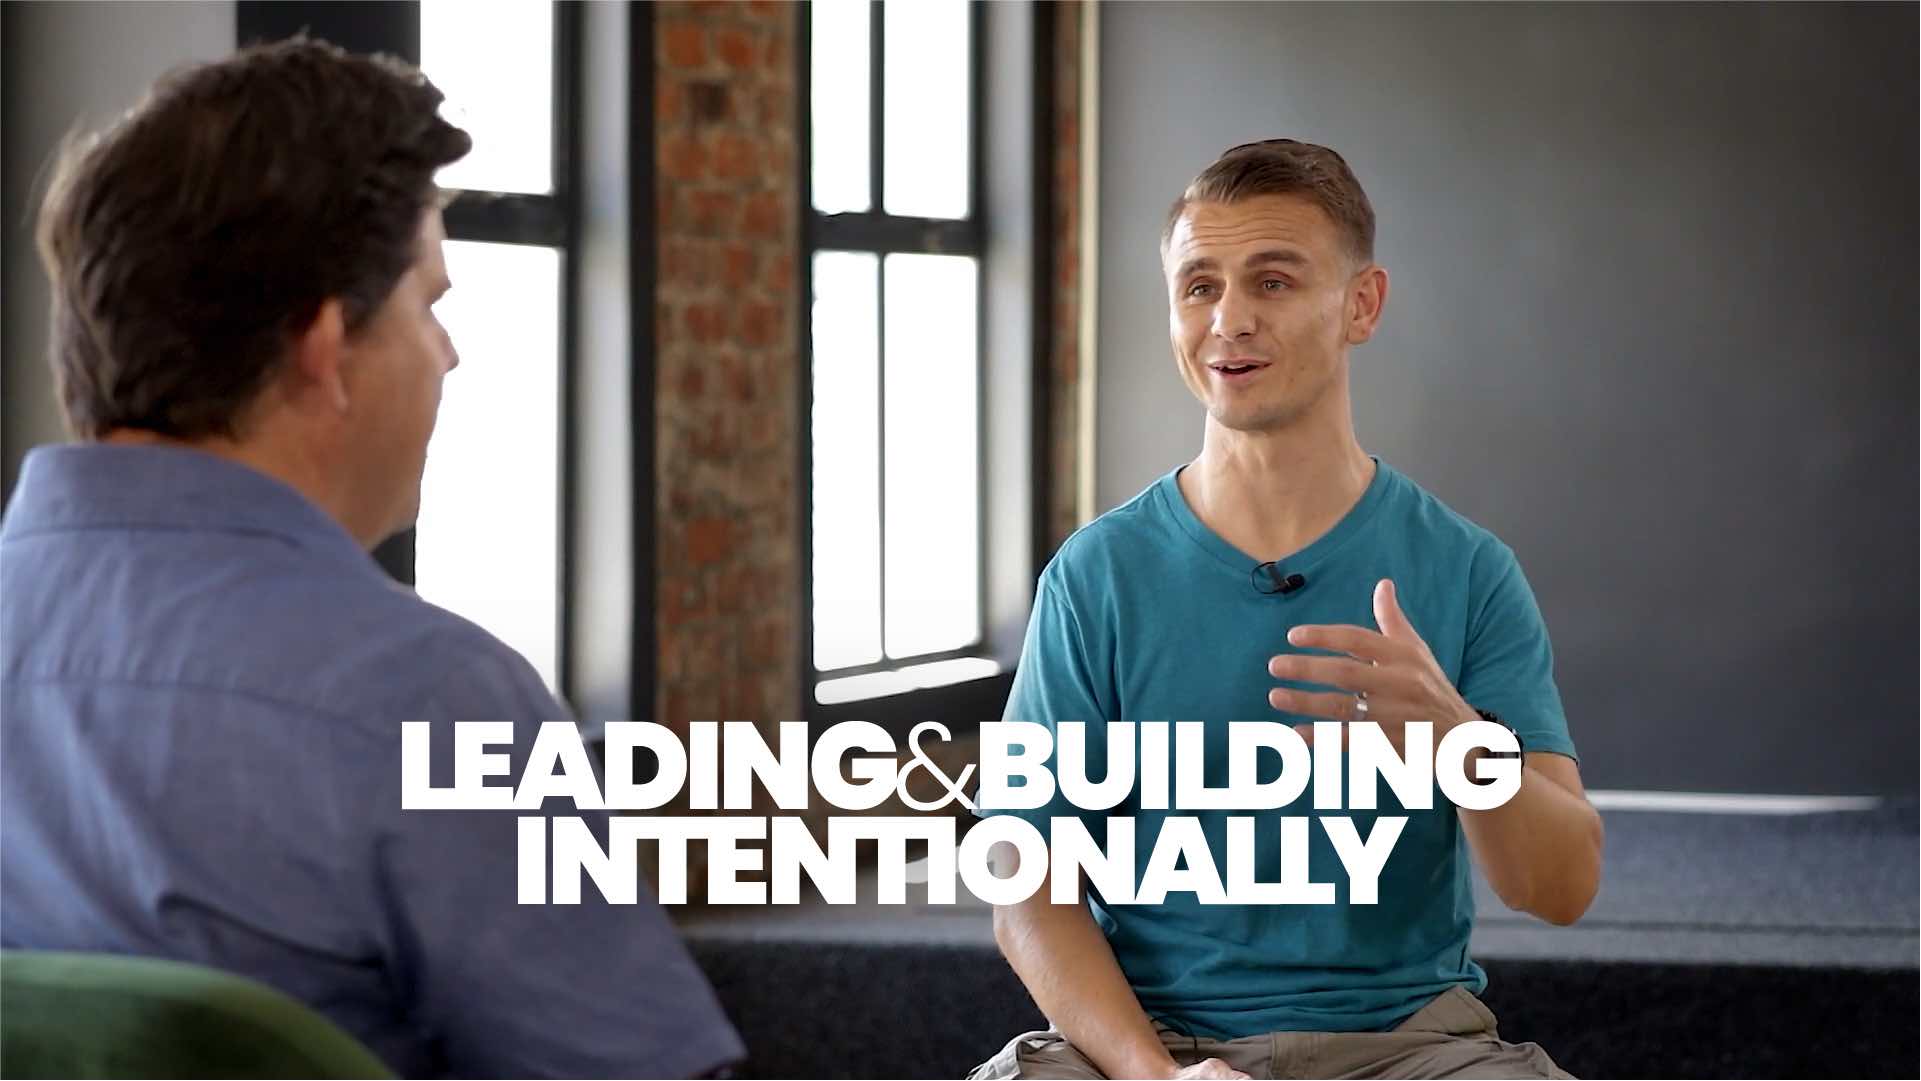 Video image for session 4 of Ins and Outs of Community Leading on leading and building intentionally.